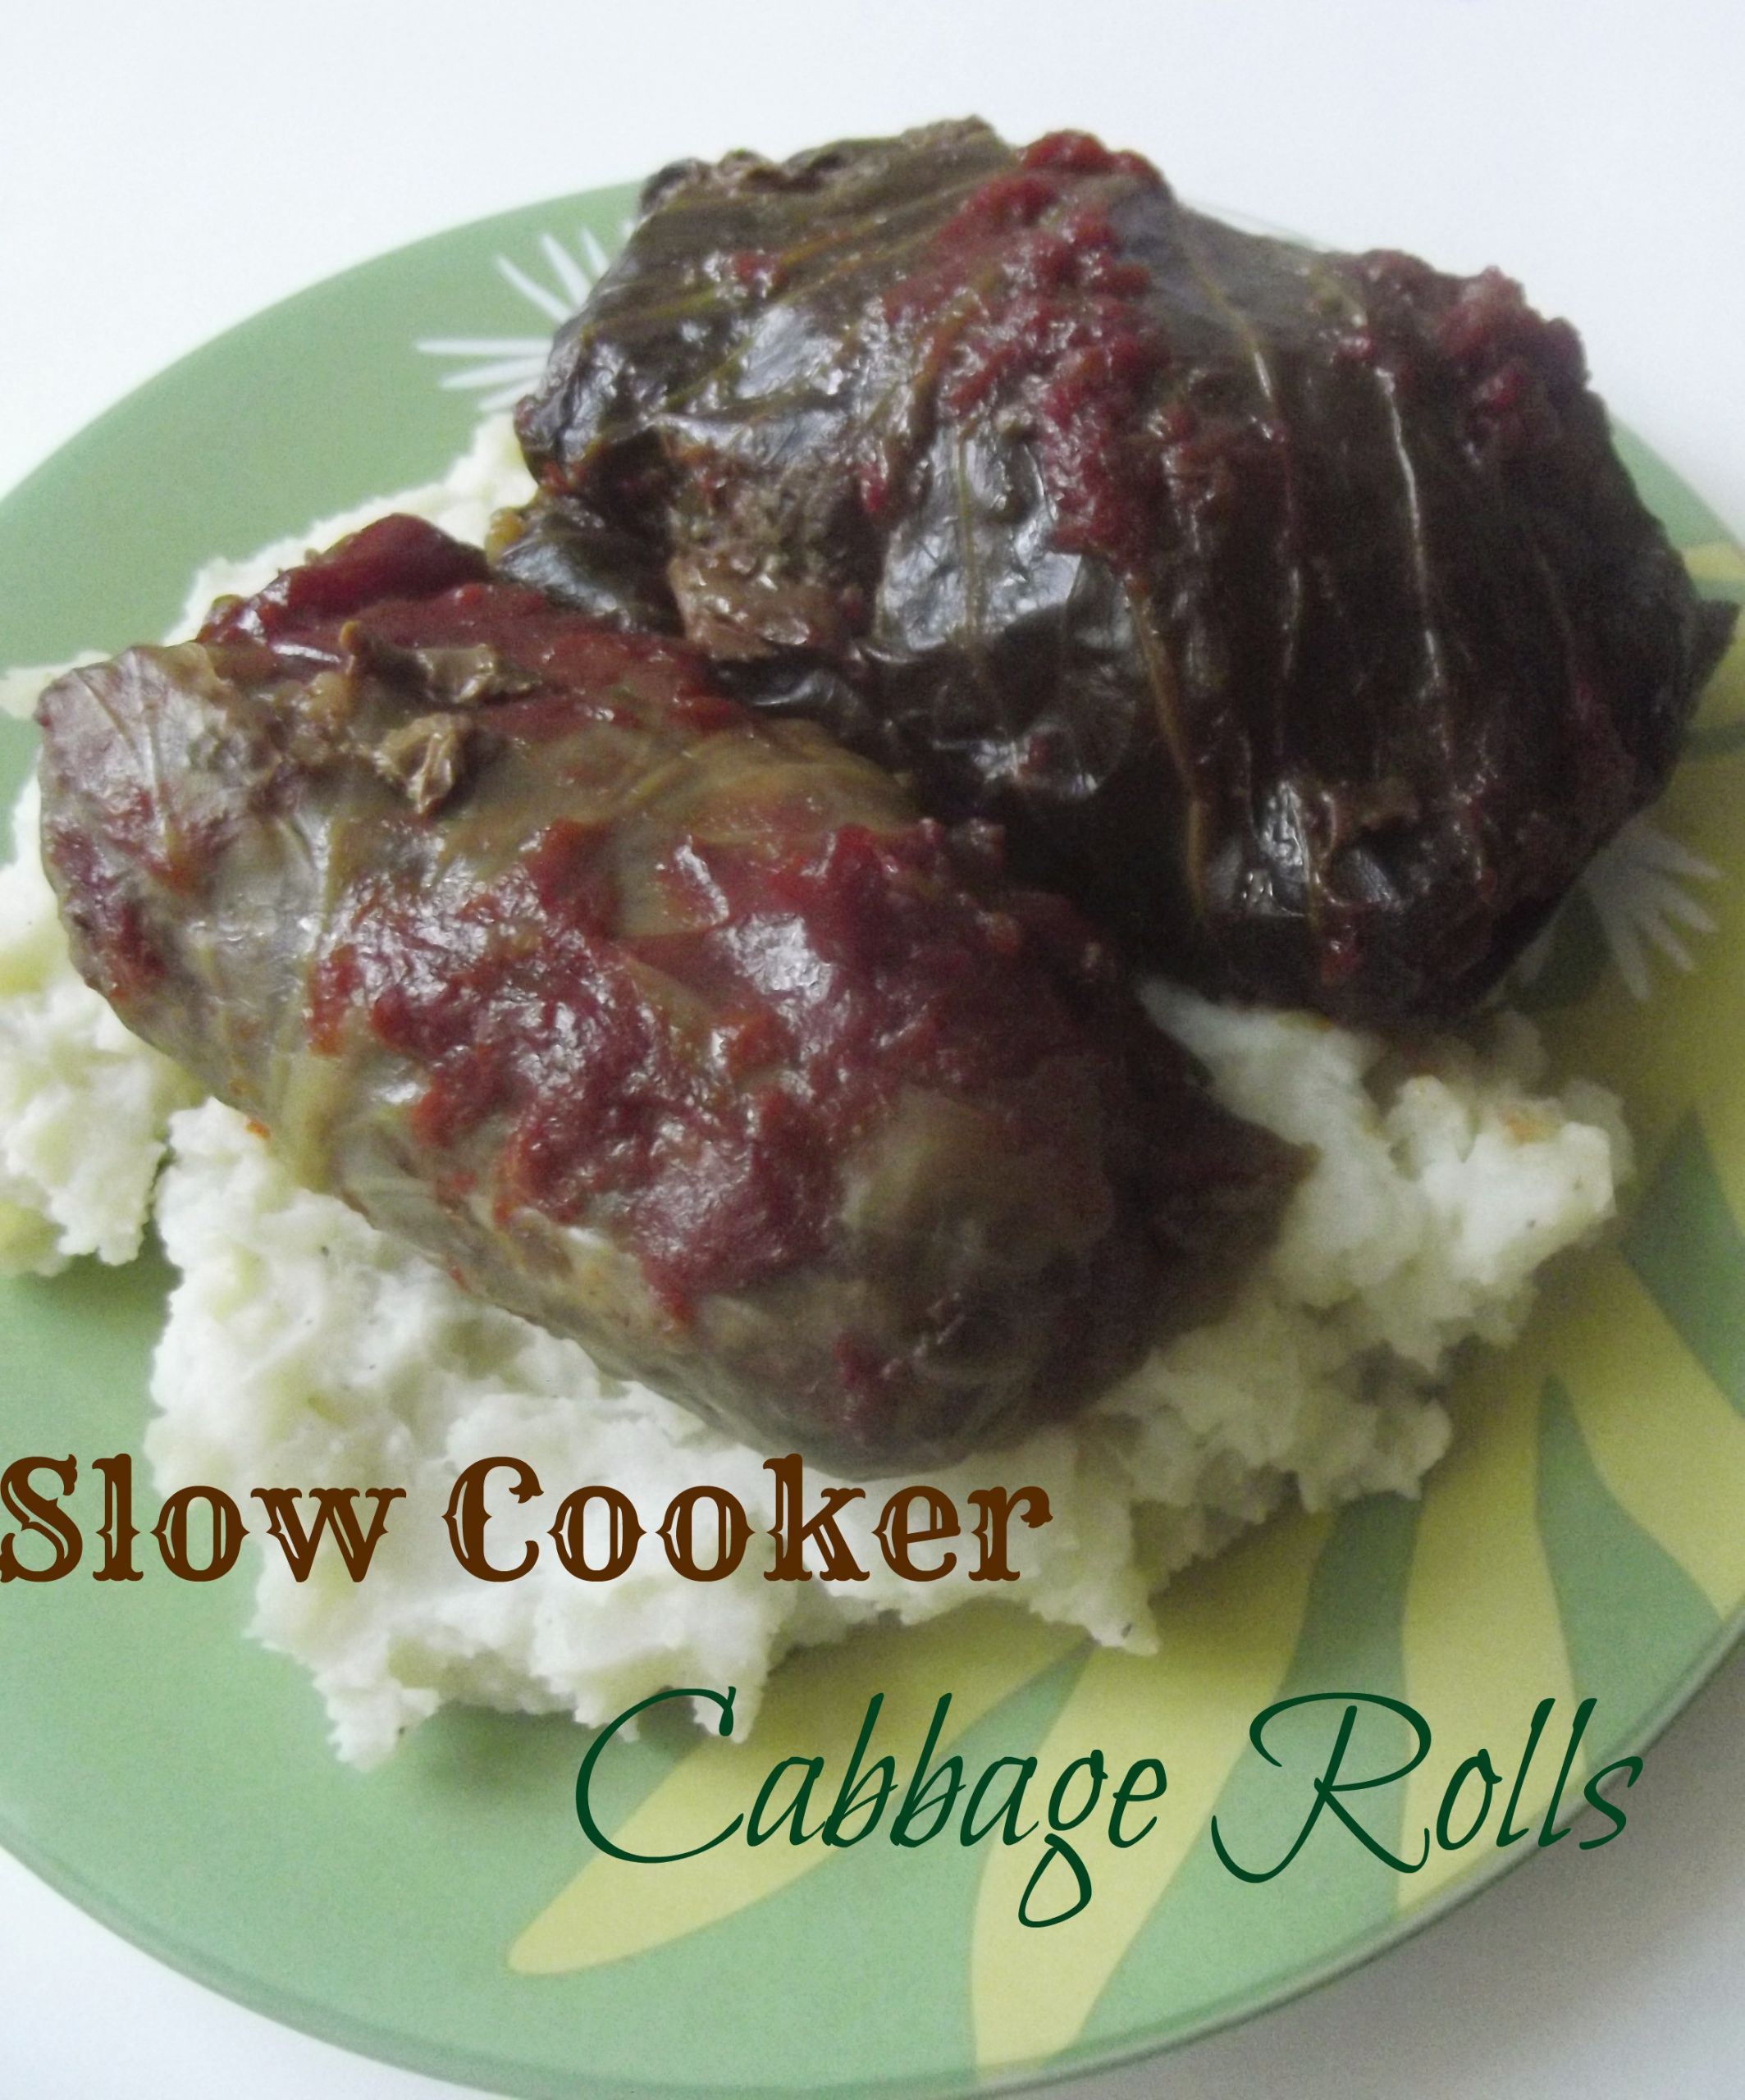 Slow Cooker Cabbage Rolls
 Slowcookercabbagerollslarge Life With The Crust Cut f